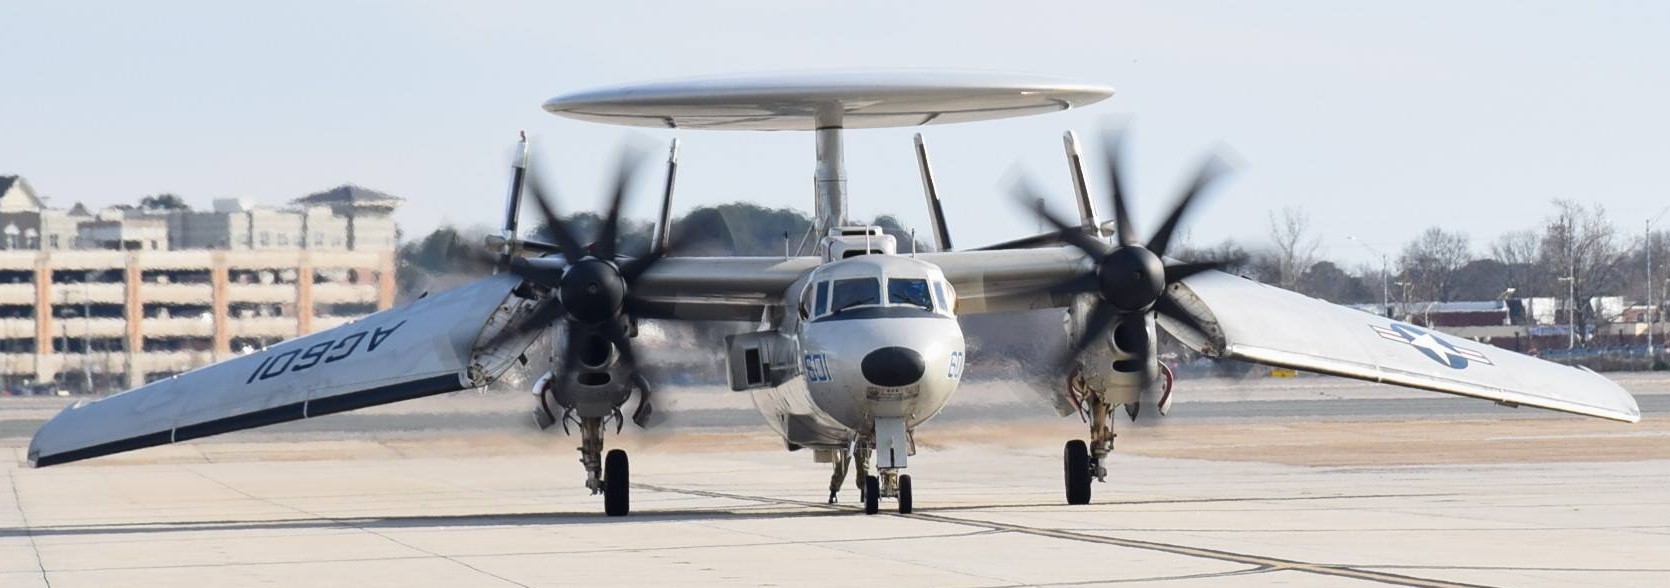 vaw-121 bluetails airborne command and control squadron us navy e-2d advanced hawkeye cvw-7 uss abraham lincoln cvn-72 66